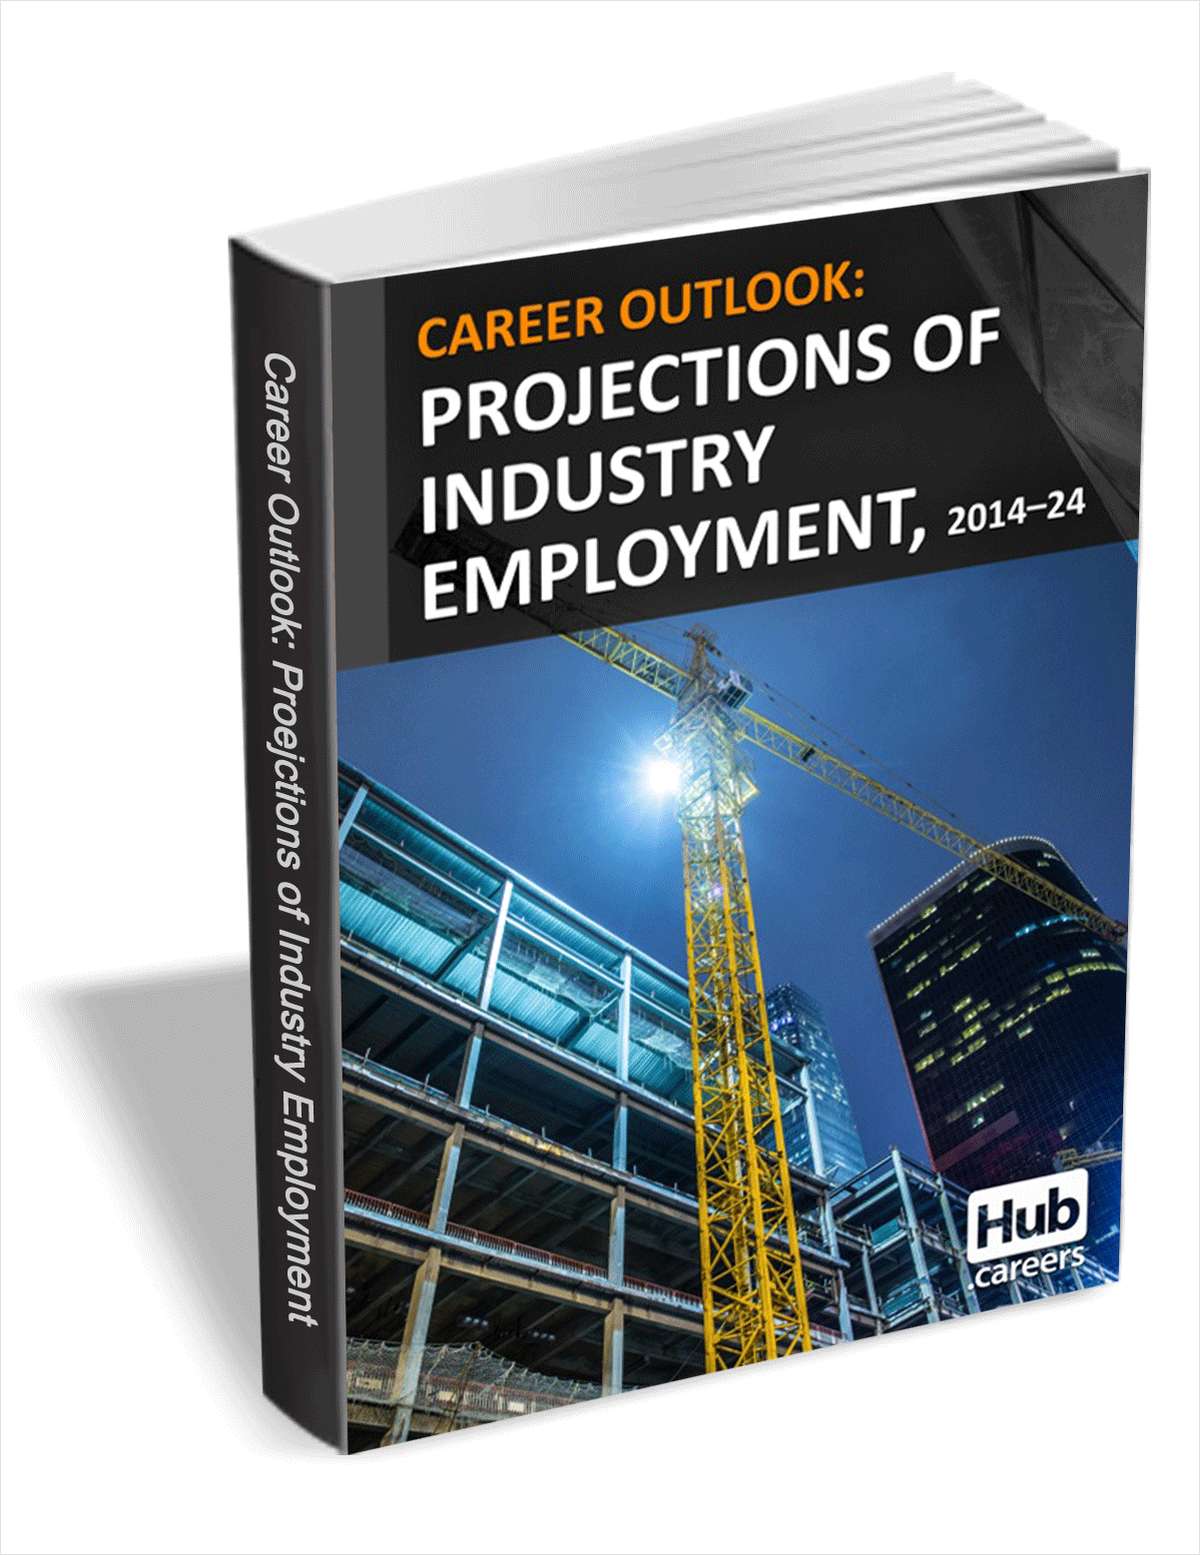 Projections of Industry Employment, 2014-24 - Career Outlook